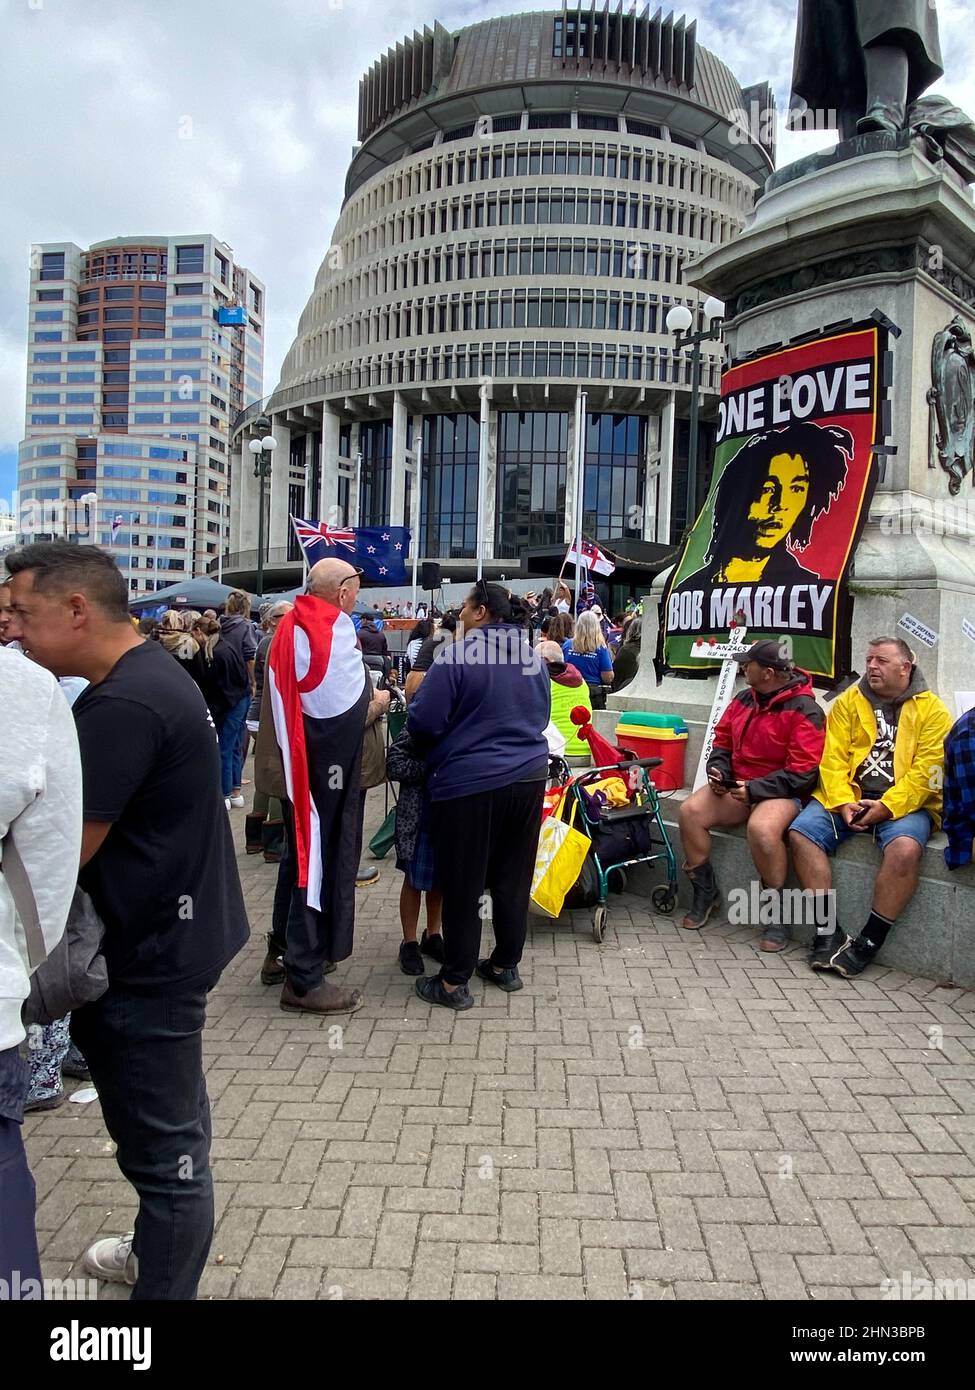 Protesters against the coronavirus disease (COVID-19) restrictions and vaccine mandates gather in front of the parliament in Wellington, New Zealand, February 14, 2022. REUTERS/Praveen Menon Stock Photo